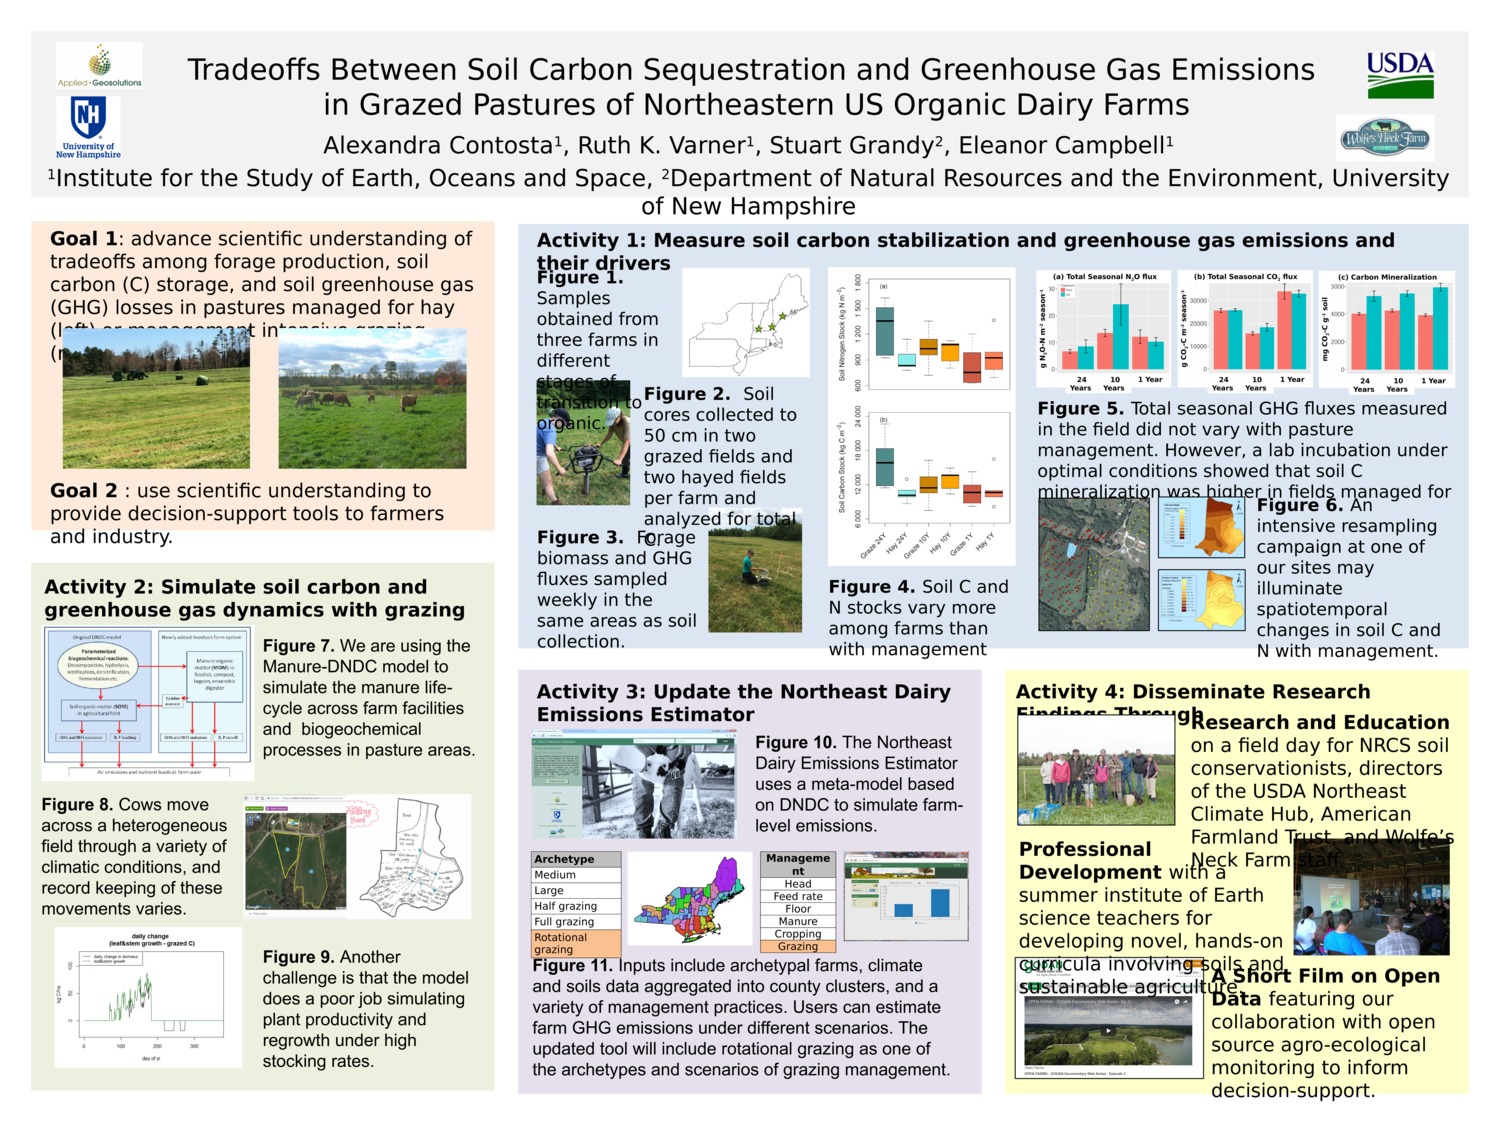 Tradeoffs Between Soil Carbon Sequestration And Greenhouse Gas Emissions In Grazed Pastures Of Northeastern Us Organic Dairy Farms by Contosta